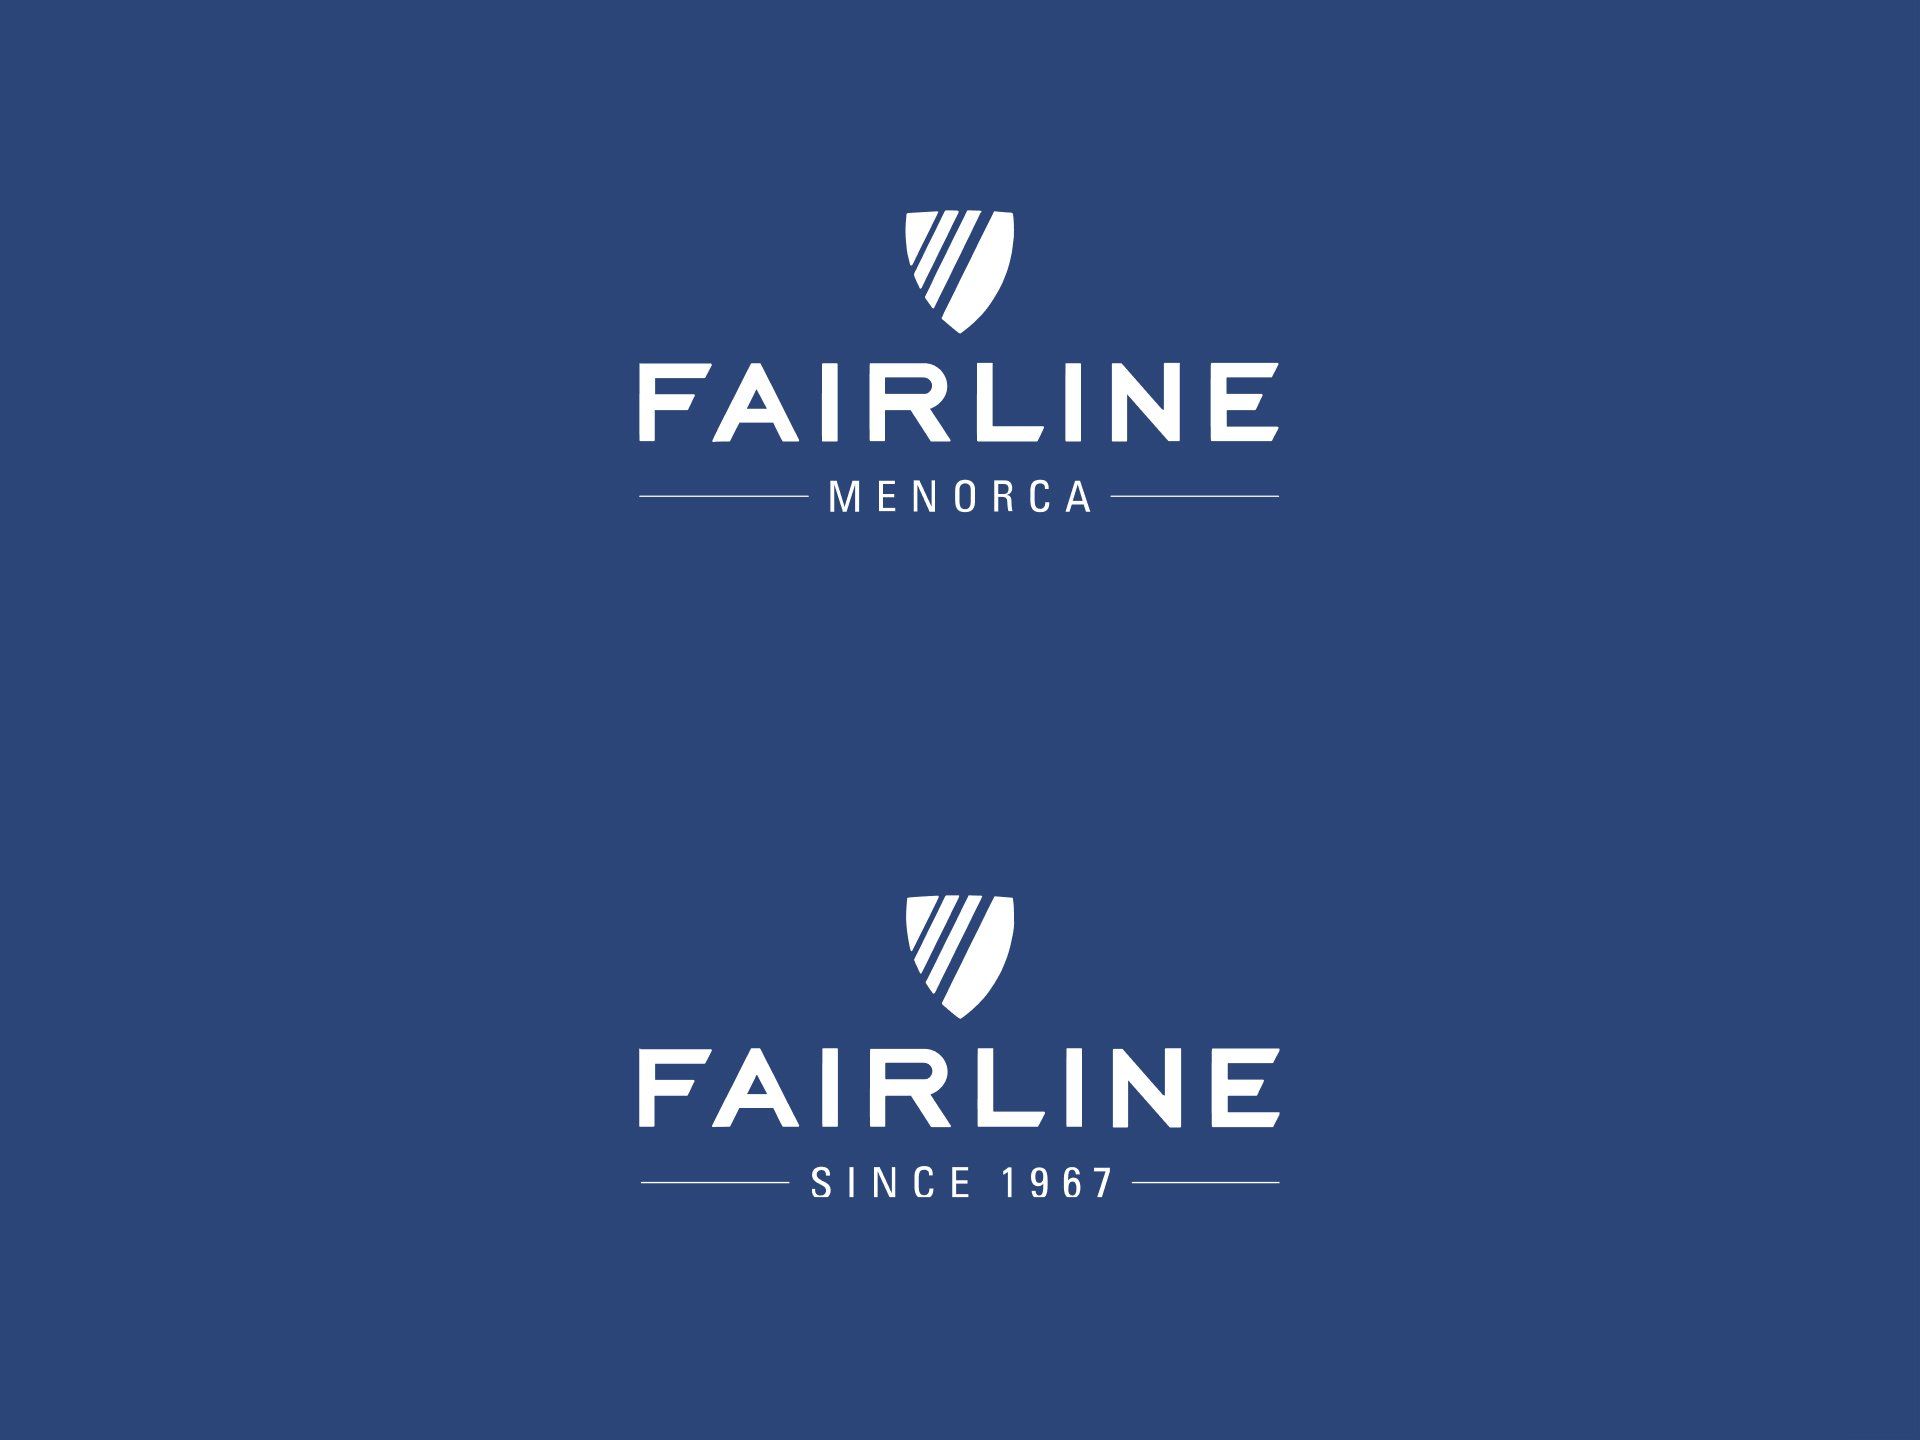 New Fairline Yachts logo and branding. © The Animo Group Ltd.